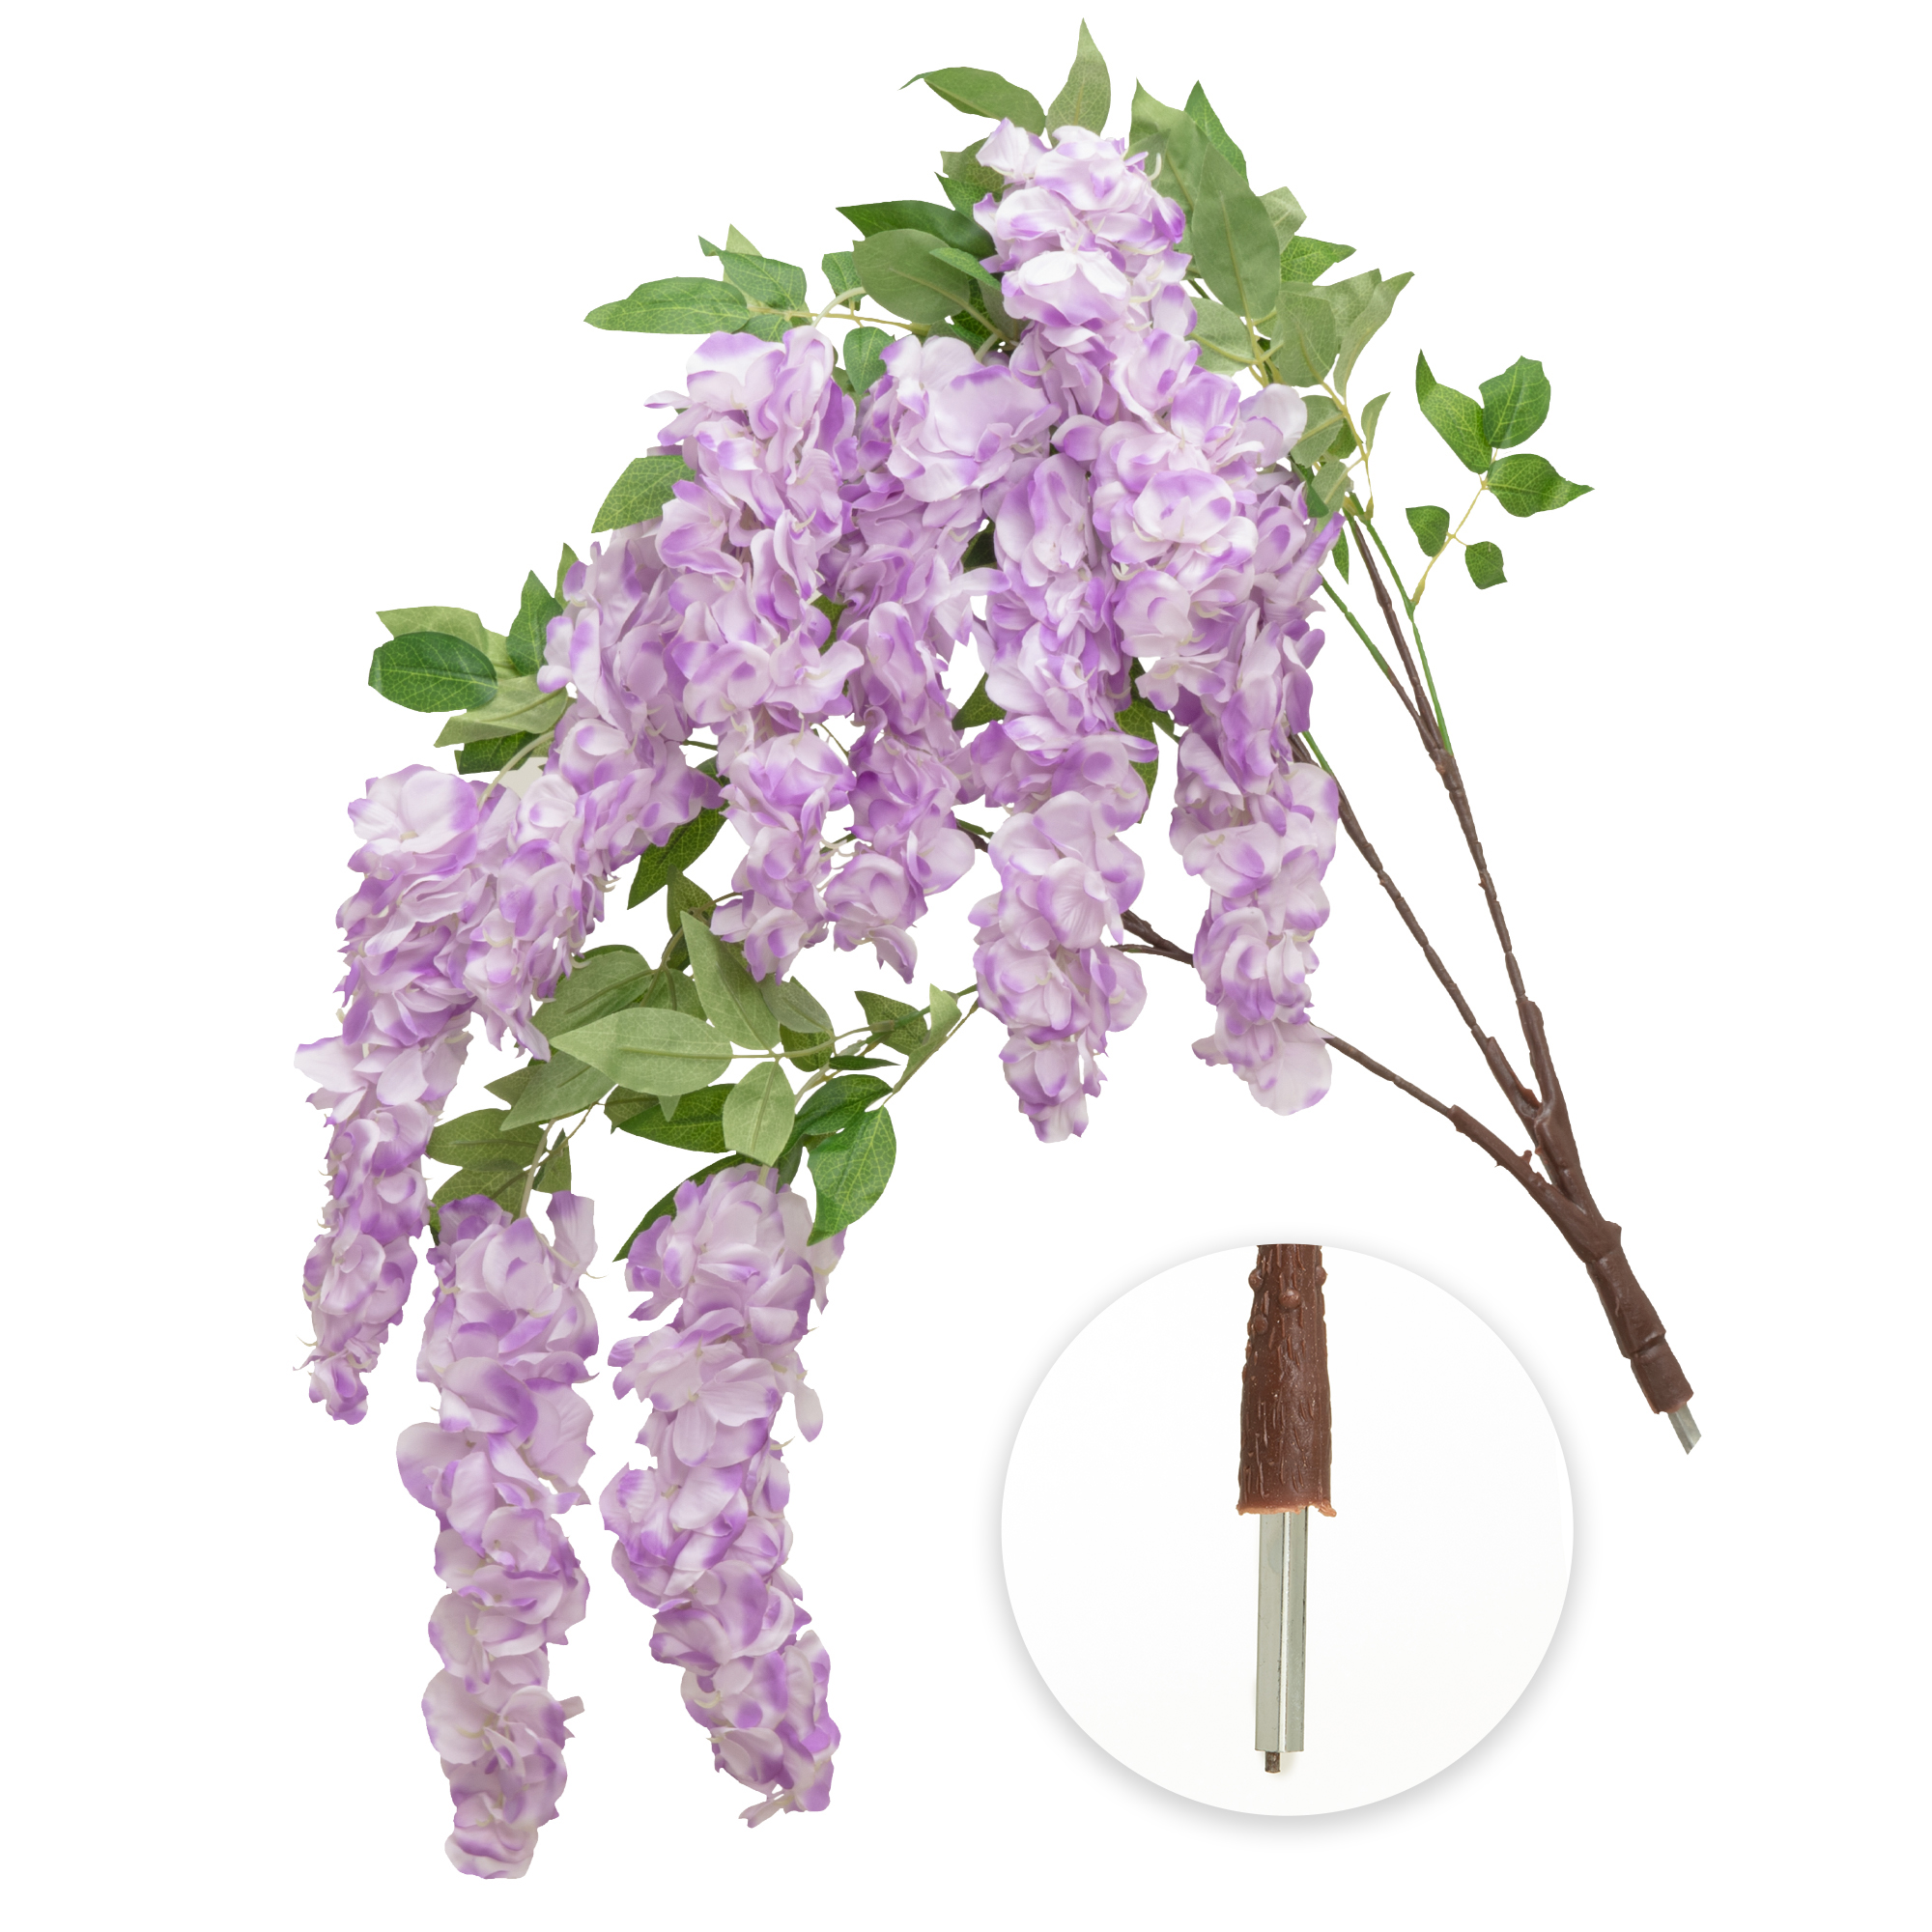 Interchangeable Wisteria Branch for Event Tree - Purple